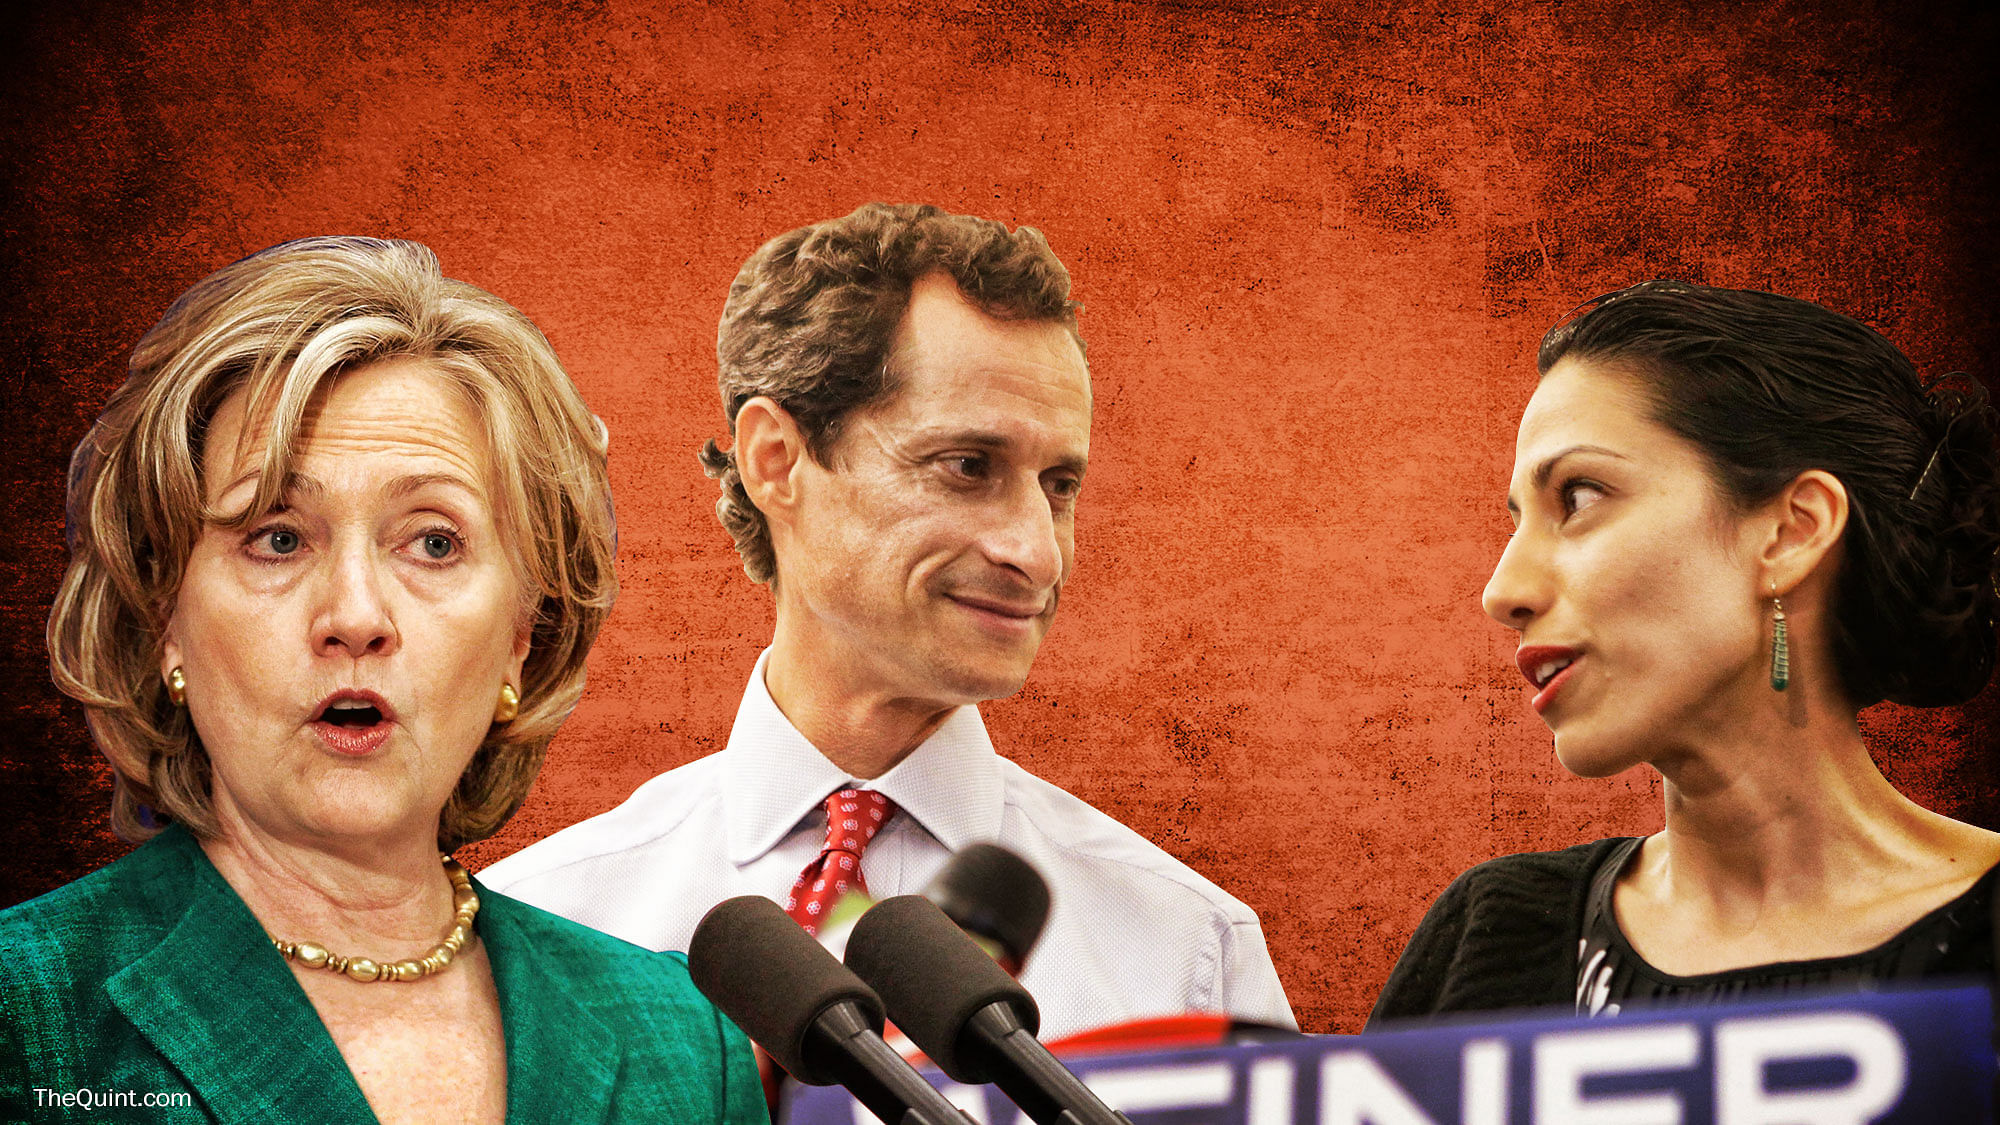 How complicat ed is the relationship between Hillary Clinton, her longest-serving aide Huma Abedin and her estranged husband? (Photo: altered by <b>The Quint</b>)